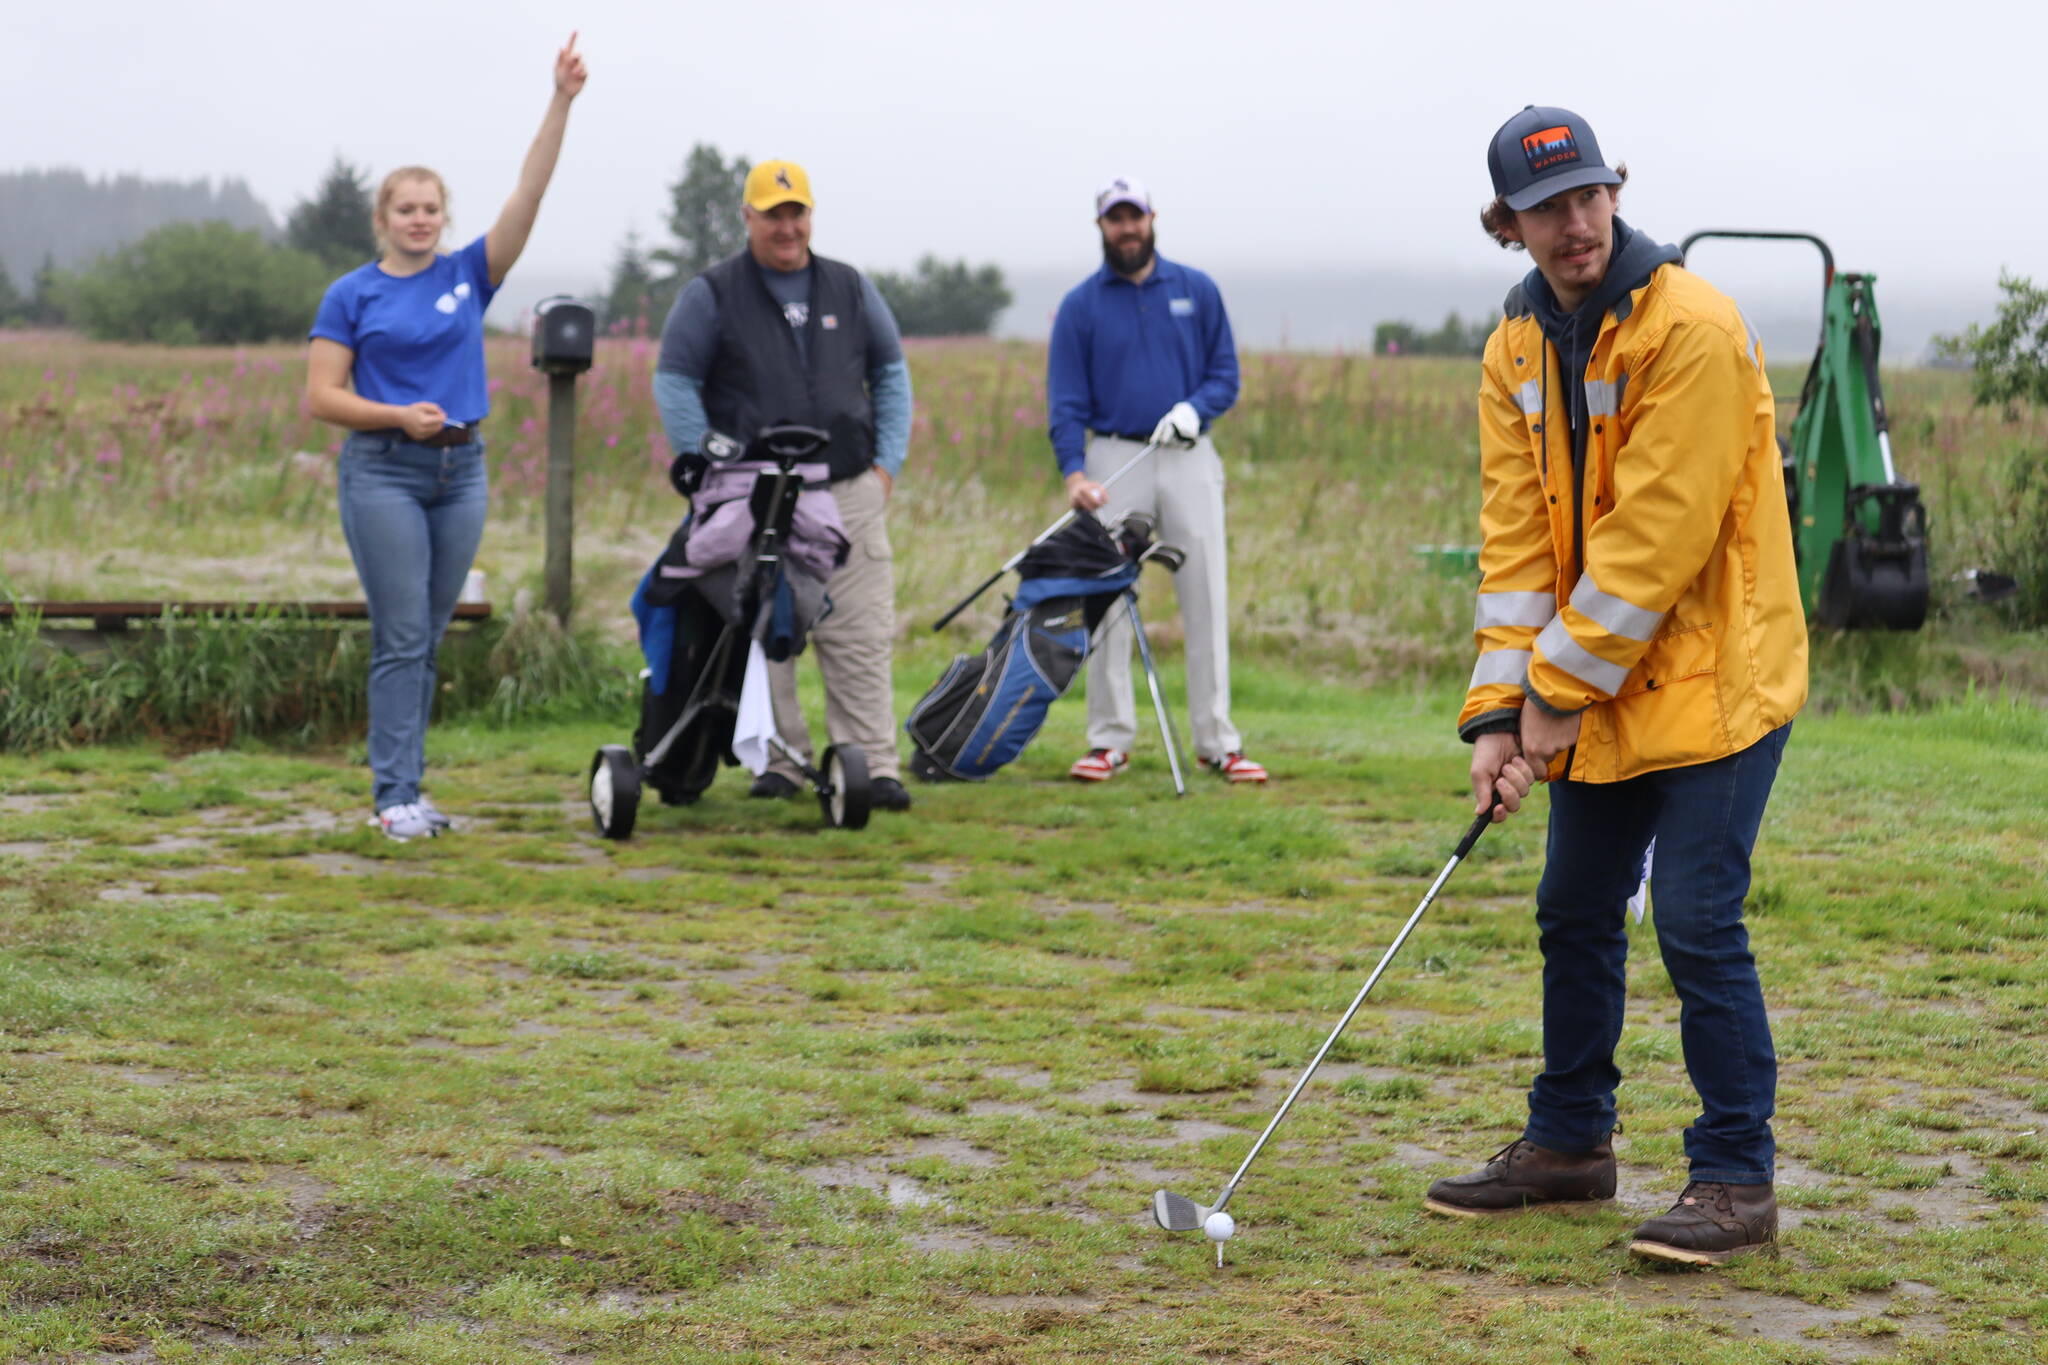 John Cashell prepared to tee off in the rain while the rest of his team, Haley Snell, Marty Stearns, and Josh Pritts, cheered on quietly from behind. (Jonson Kuhn / Juneau Empire)